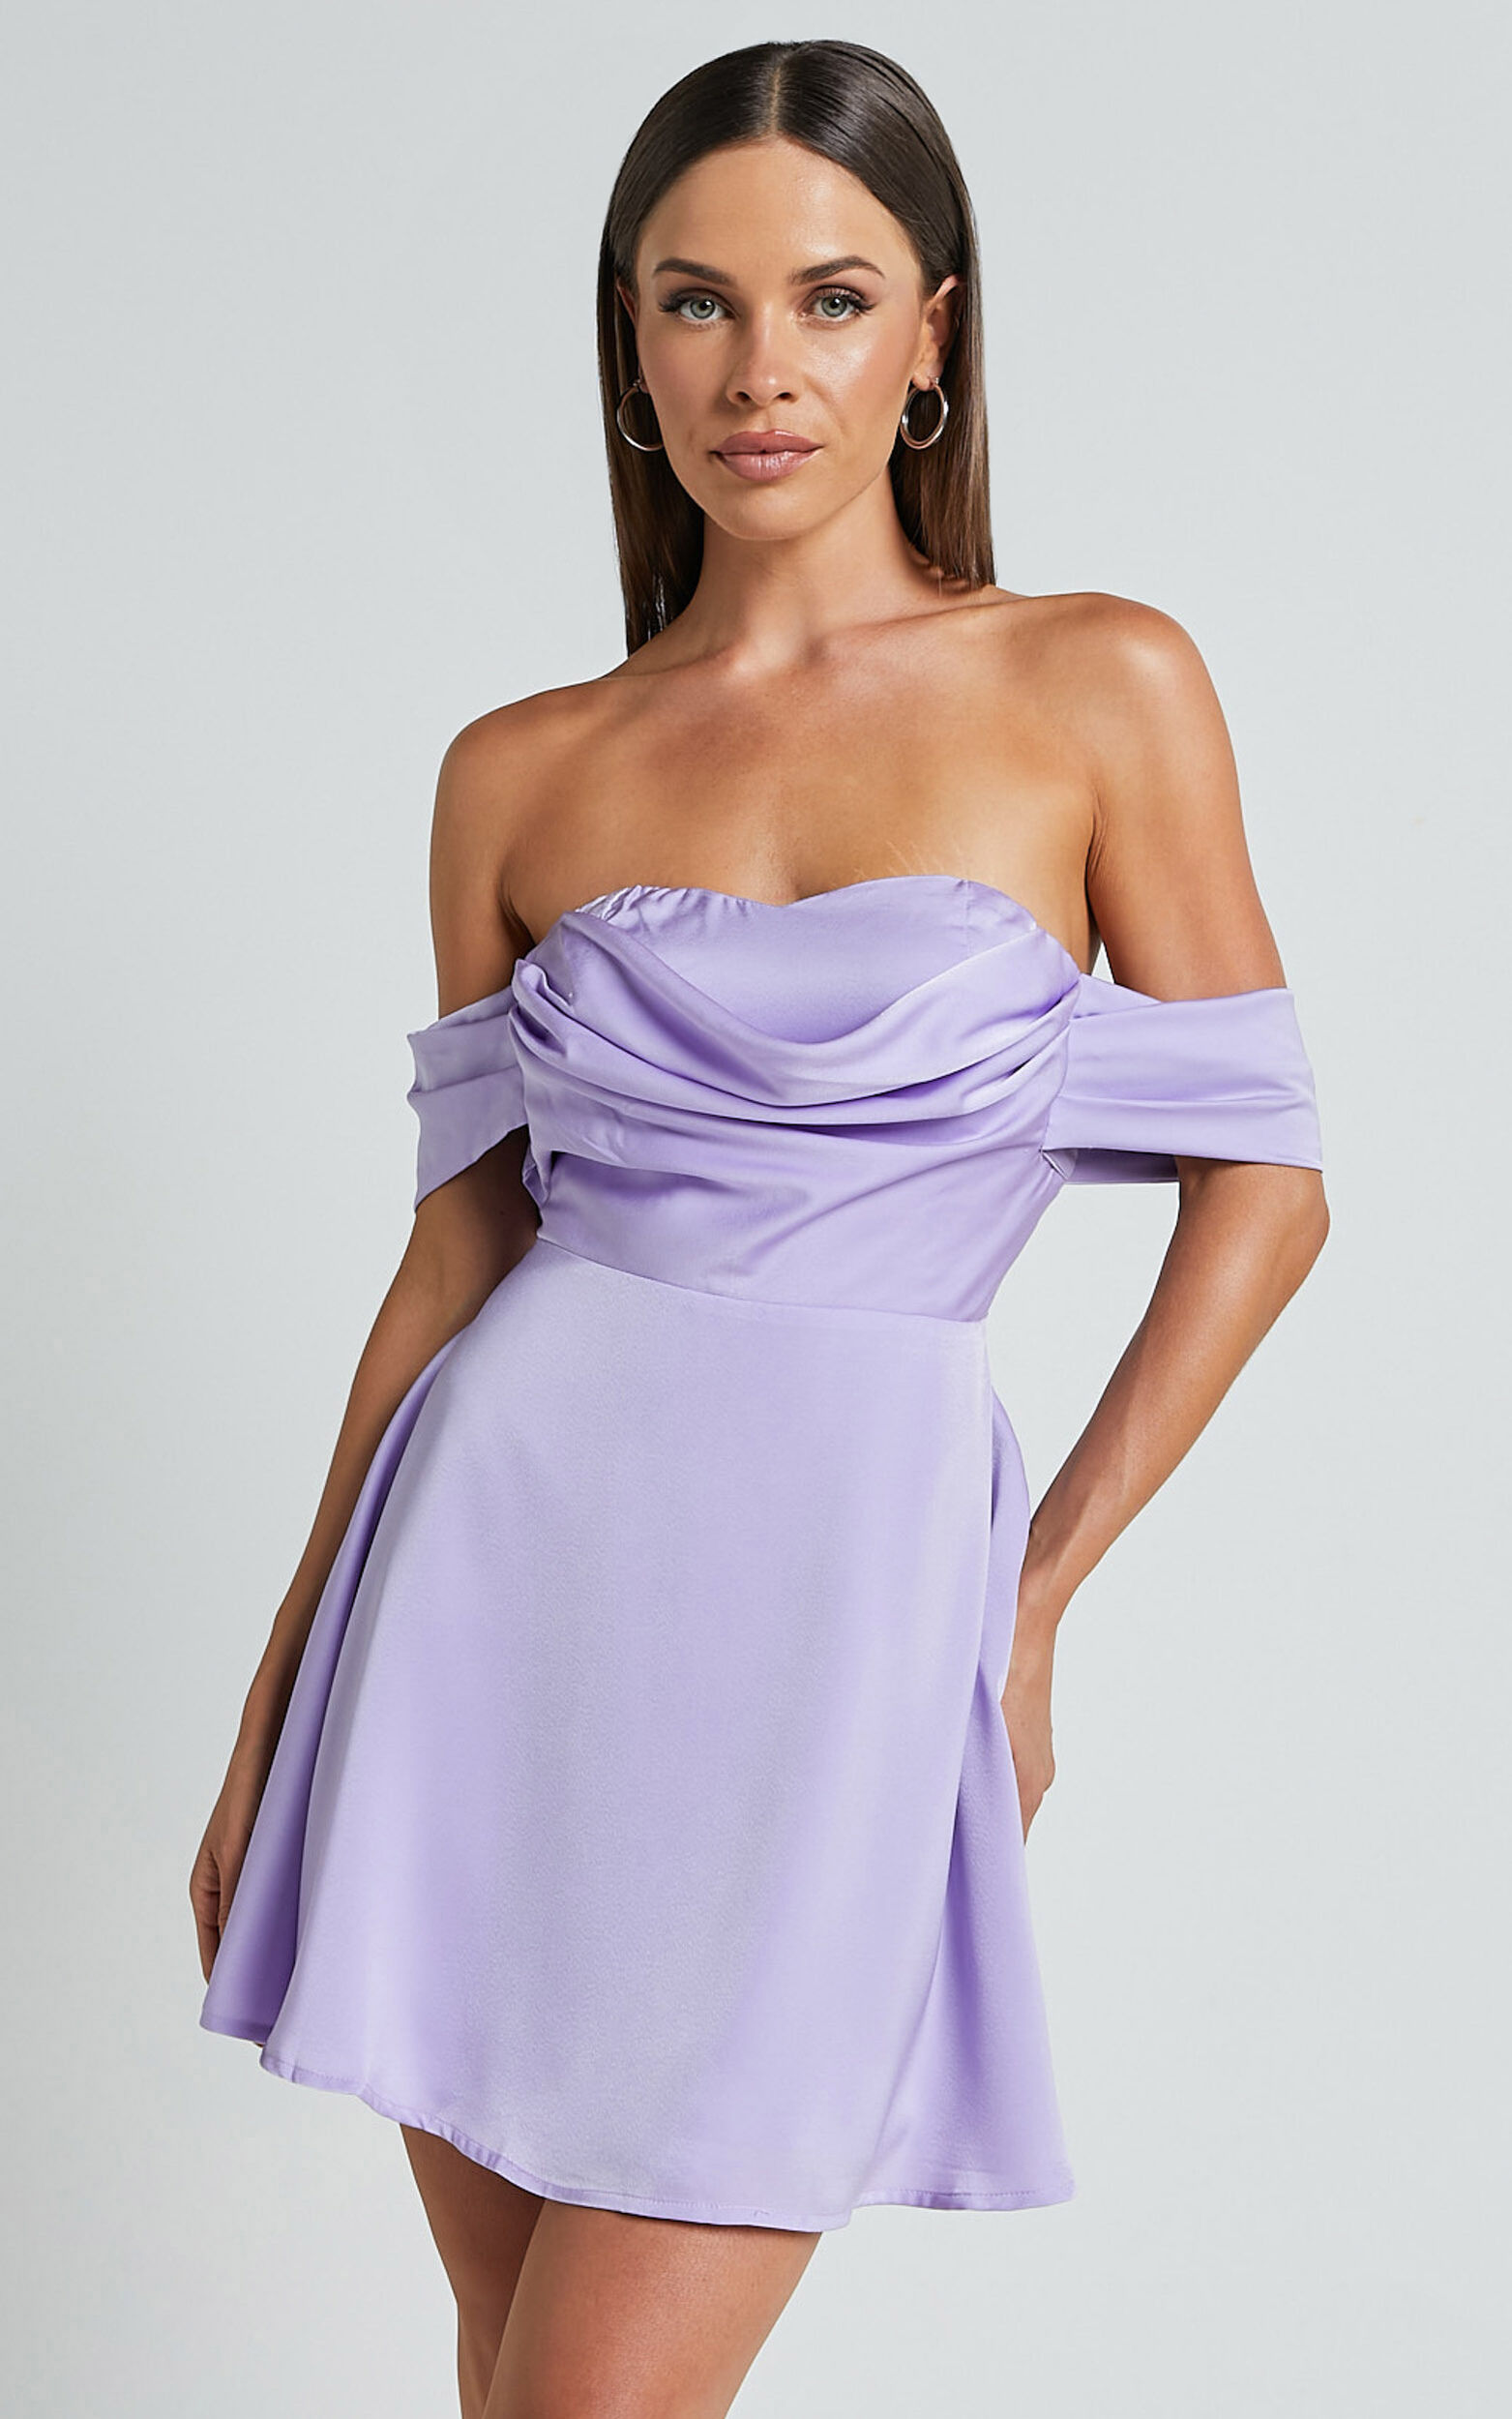 Clarinde Mini Dress - Off Shoulder Gathered Bodice in Lilac - 06, PRP1